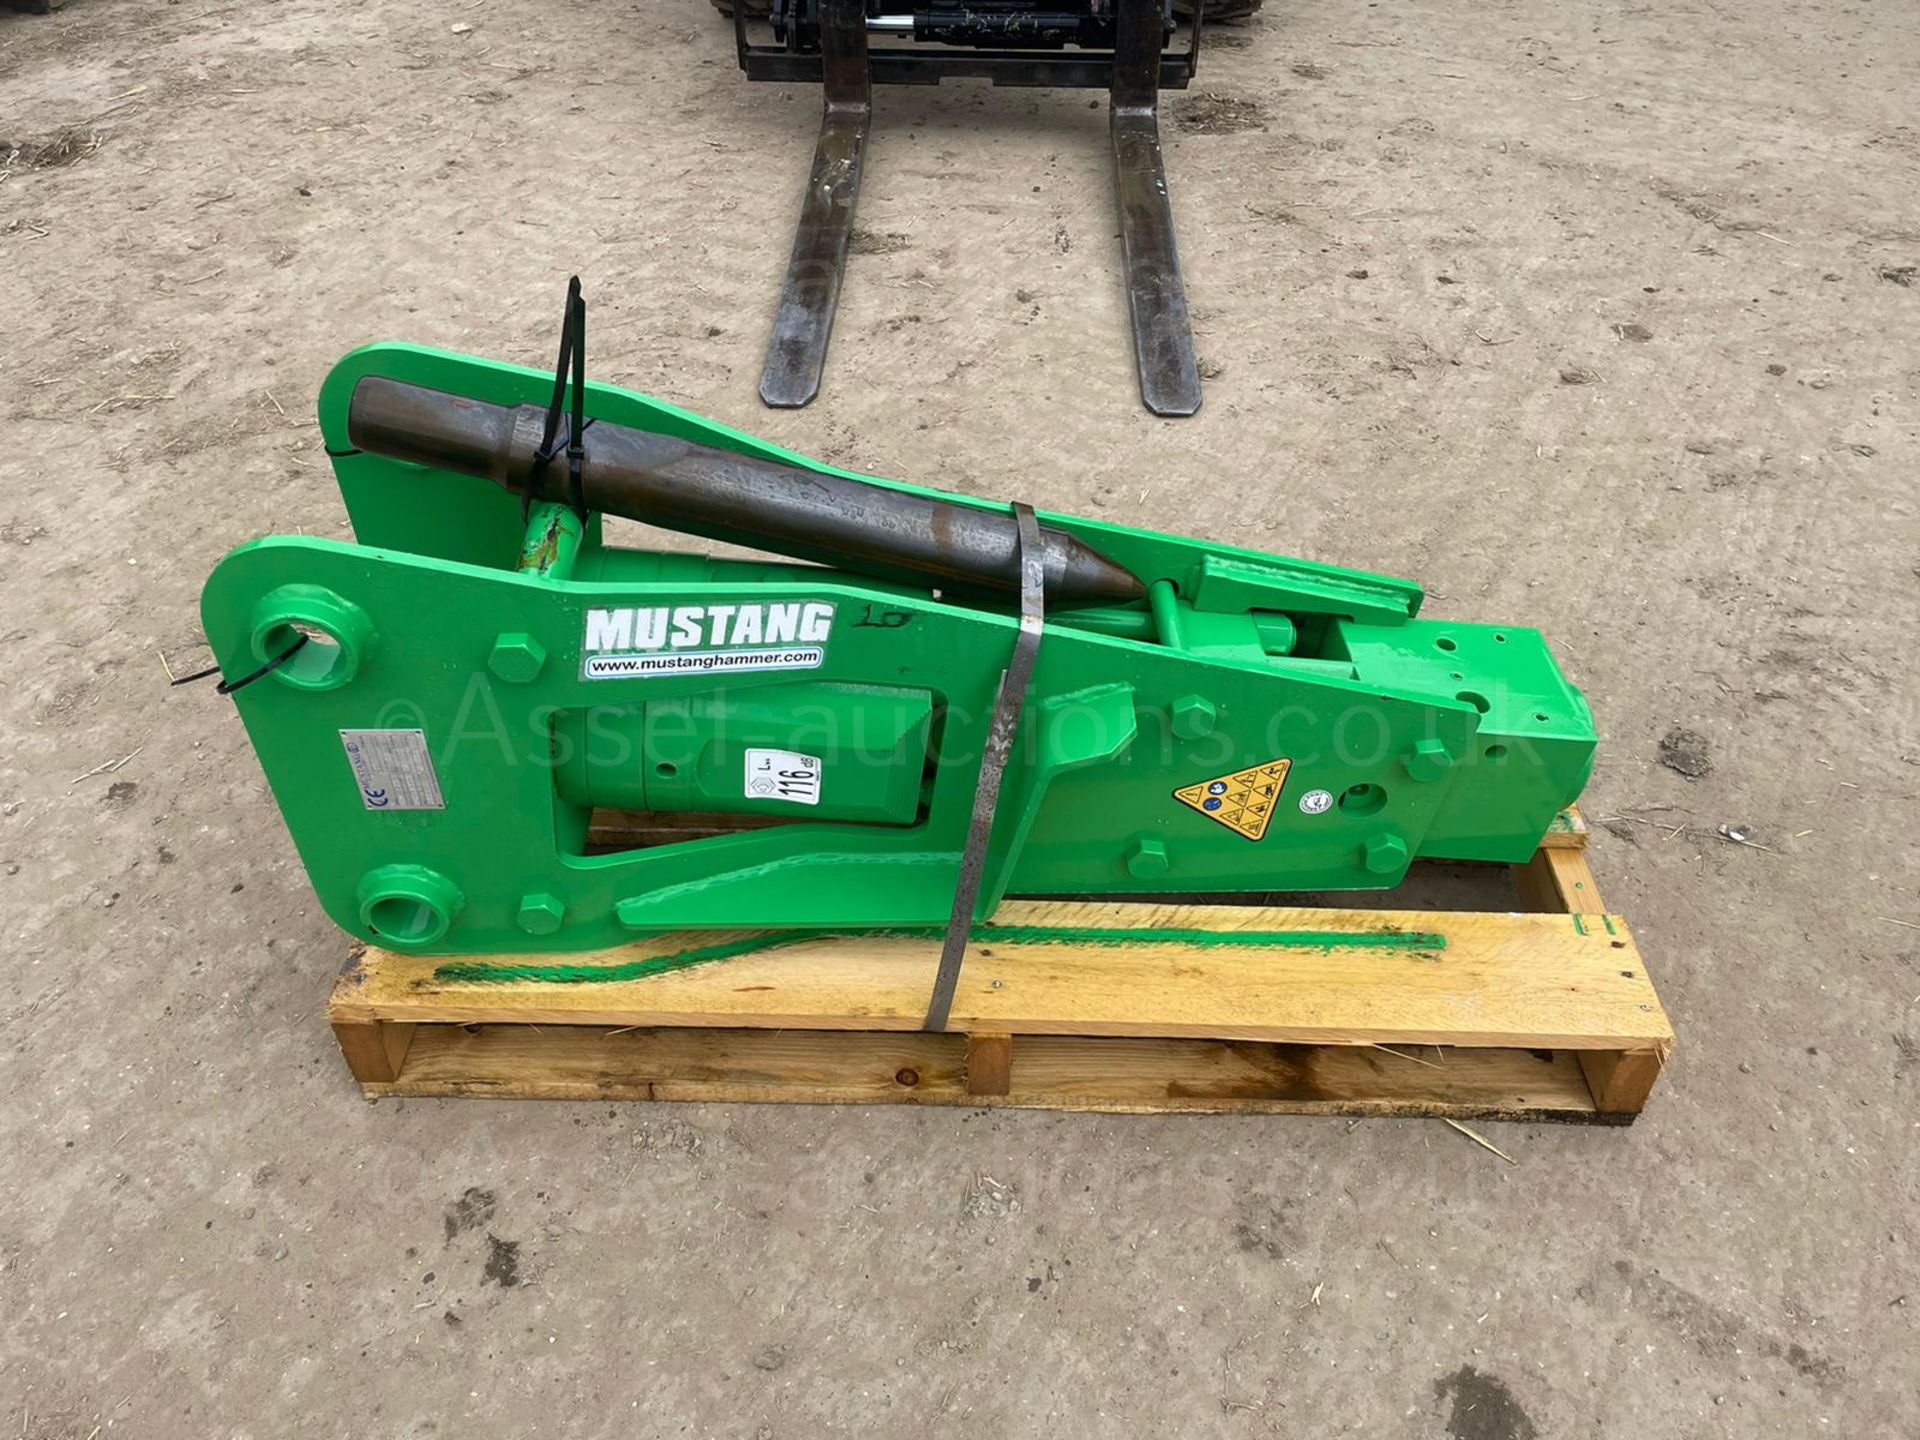 2021 MUSTANG BPH 125 ROCK BREAKER, BRAND NEW AND UNUSED, 80MM PINS, CHISEL IS INCLUDED *PLUS VAT* - Image 3 of 4